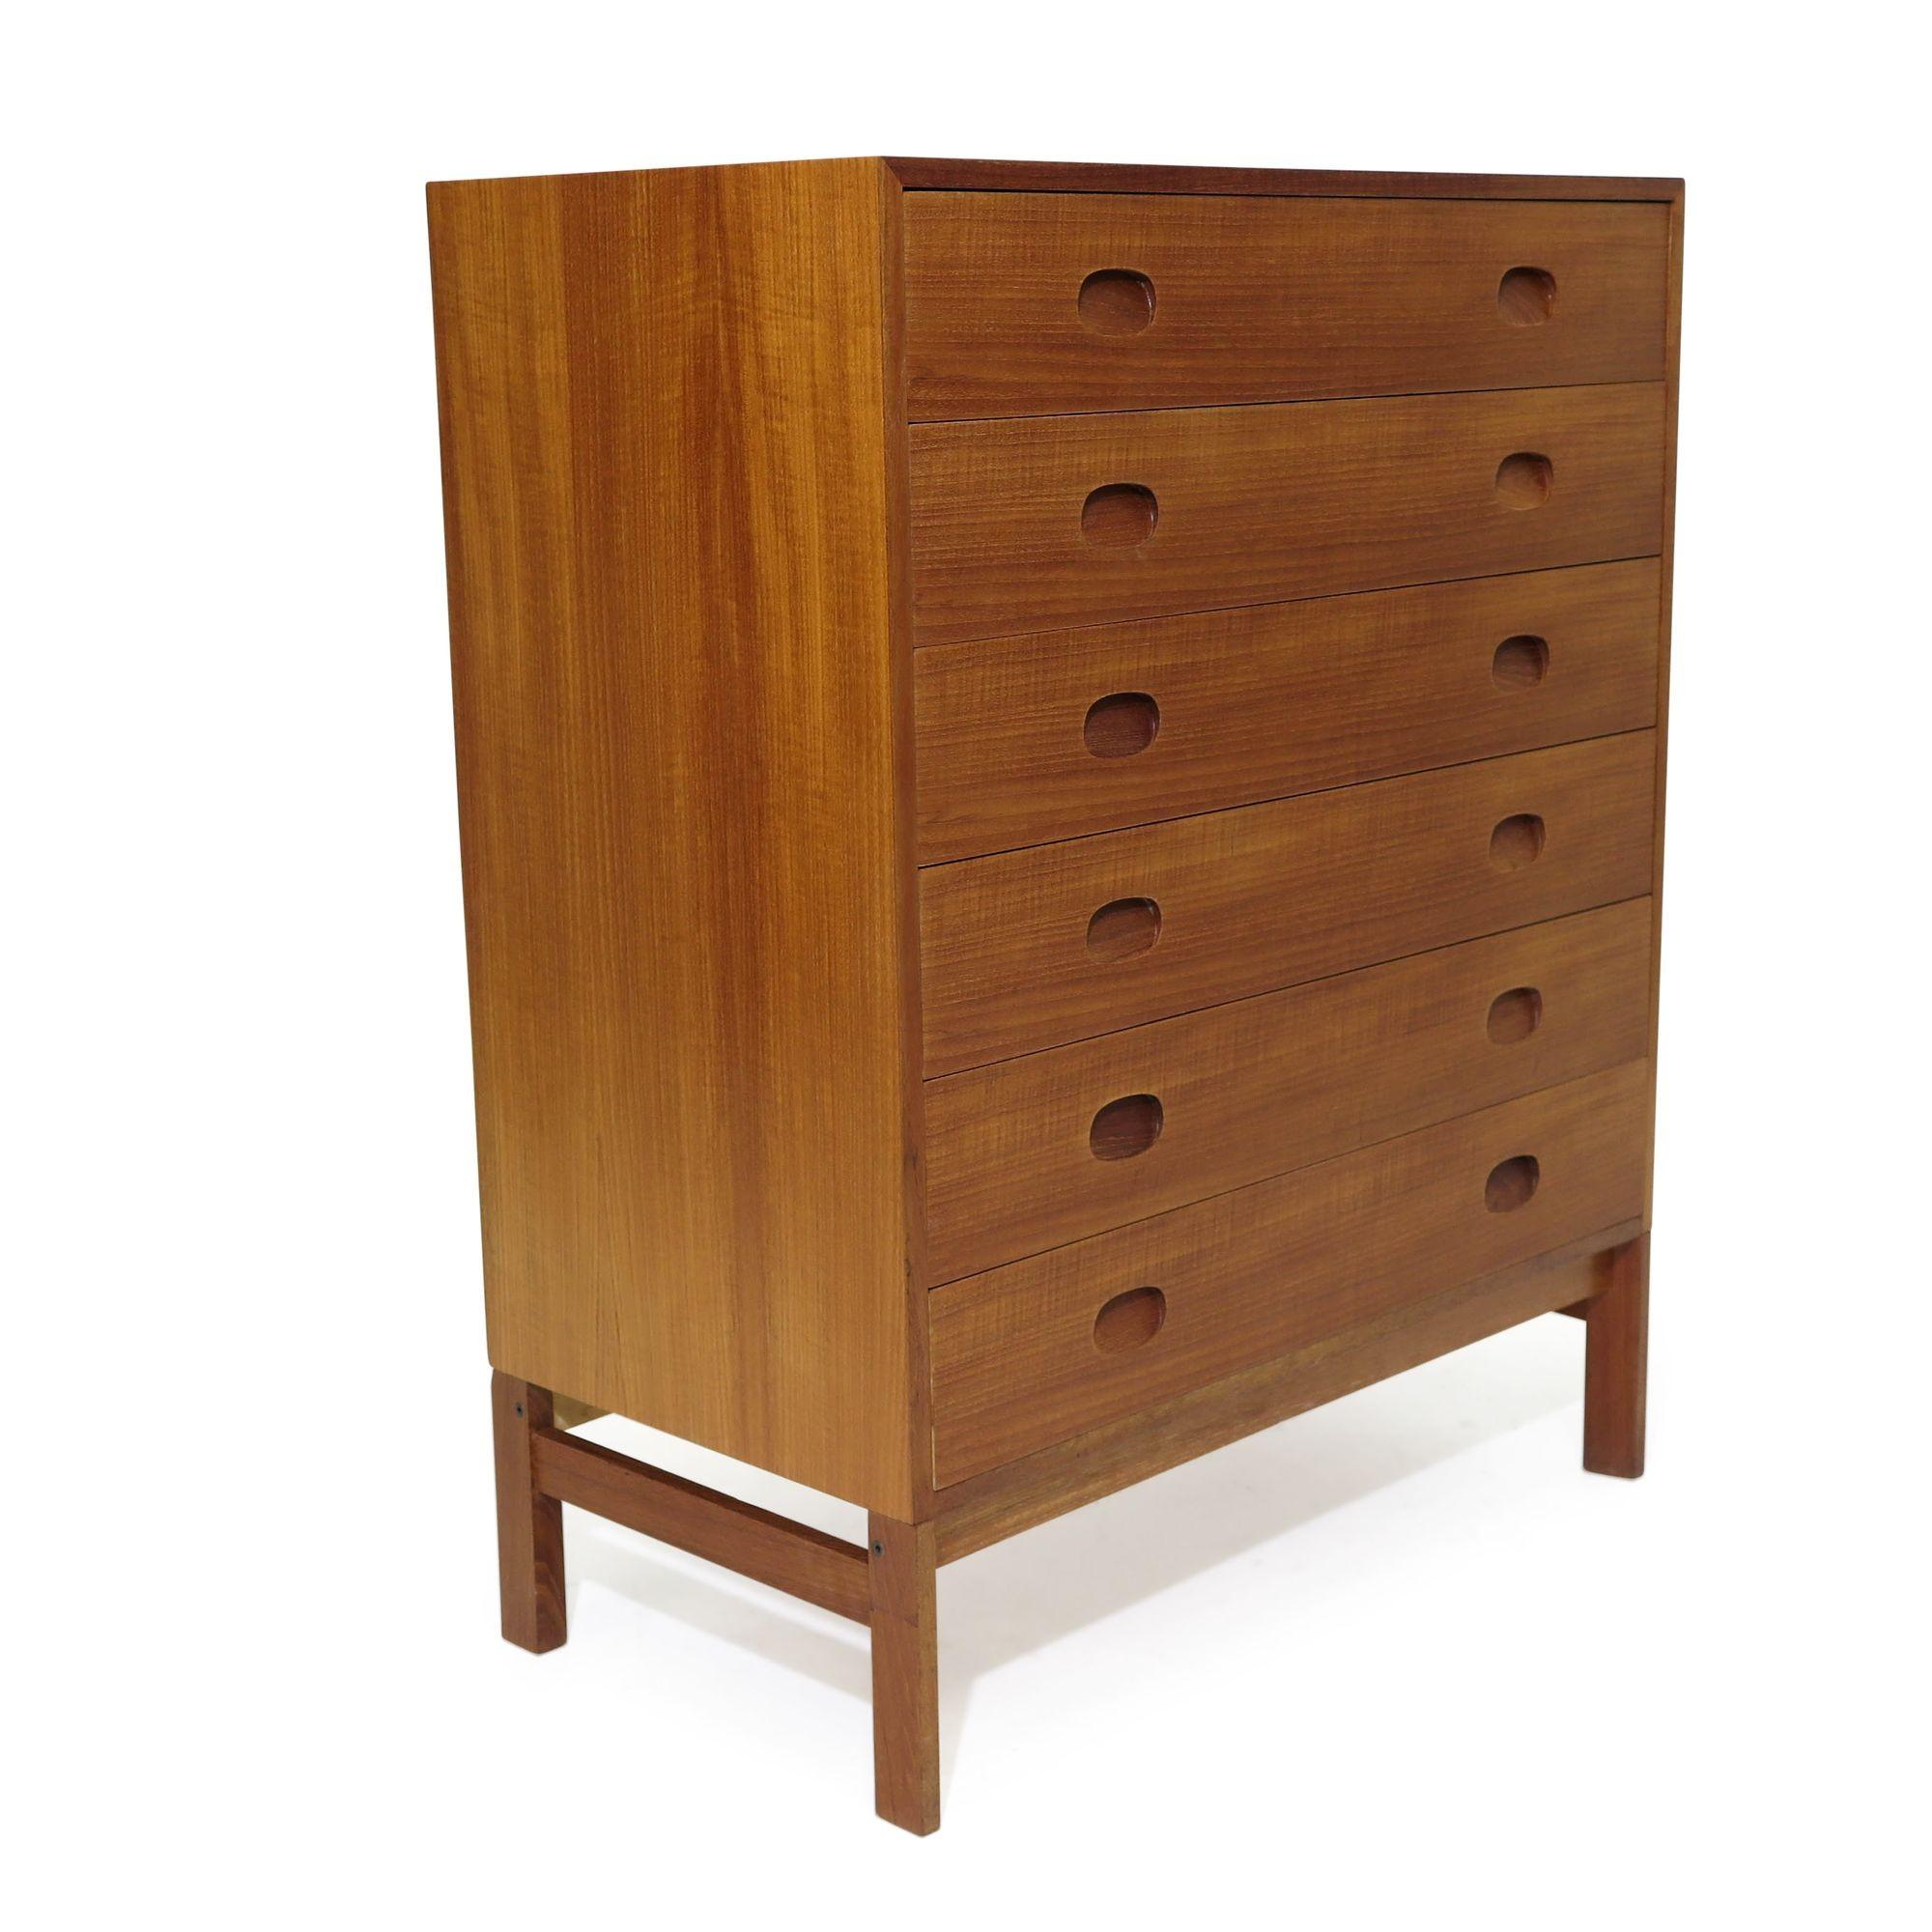 Tall danish six drawer dresser crafted of teak with oval-shaped handles and raised on trapezoid-shaped legs.
Second drawer has interior divisions. Professionally restored and in excellent condition.
 
Measures: W 37.3/8 x D 19. 5/8 x H 46.25.